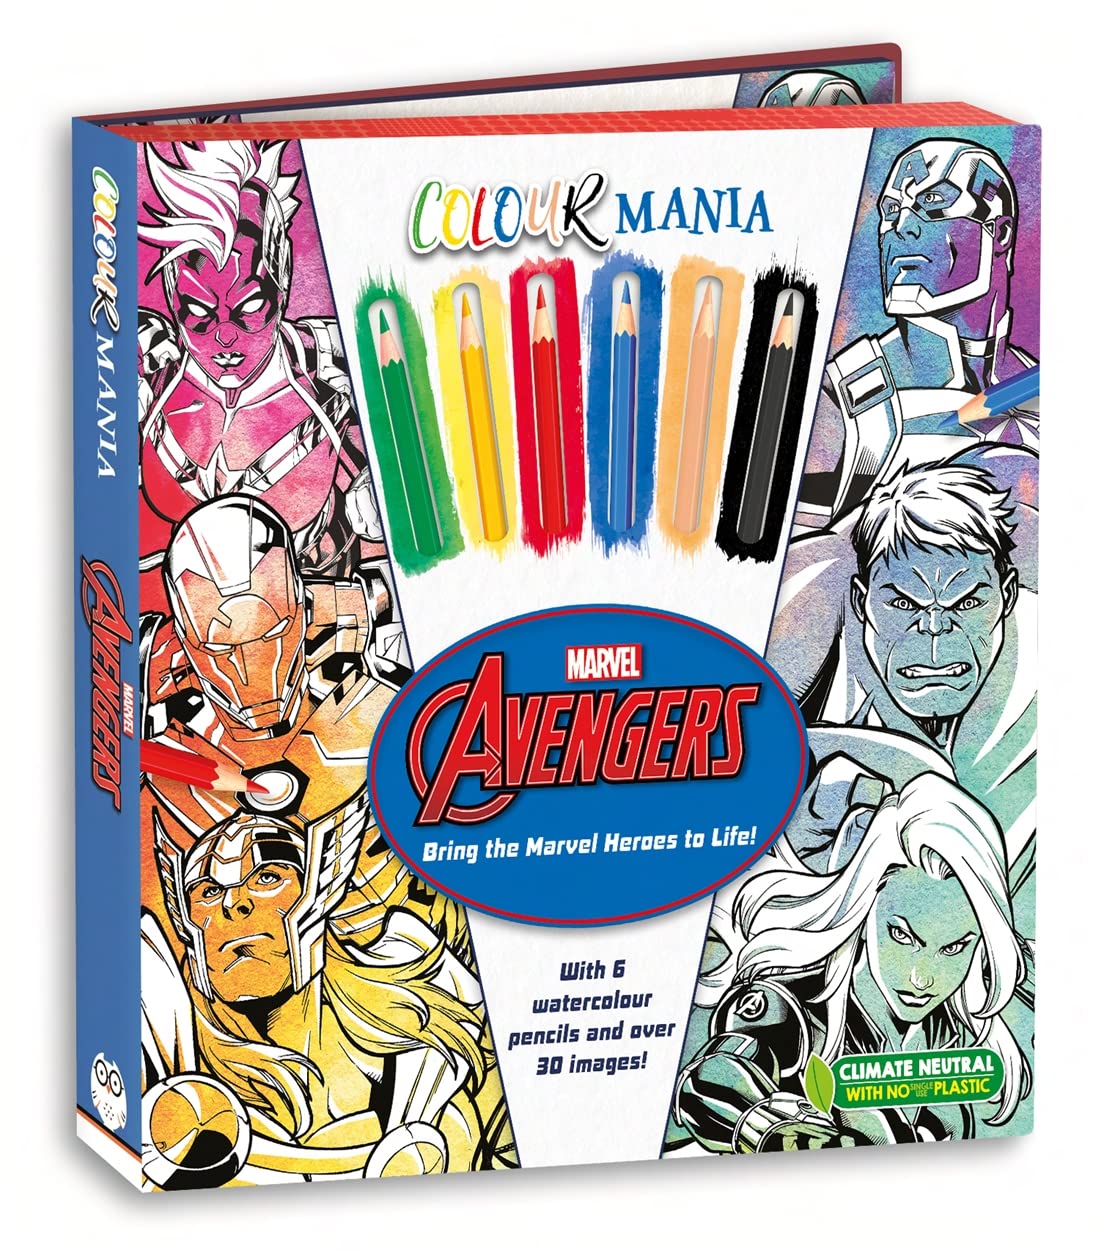 Marvel: Avengers (Colouring Book and Pencil Set)